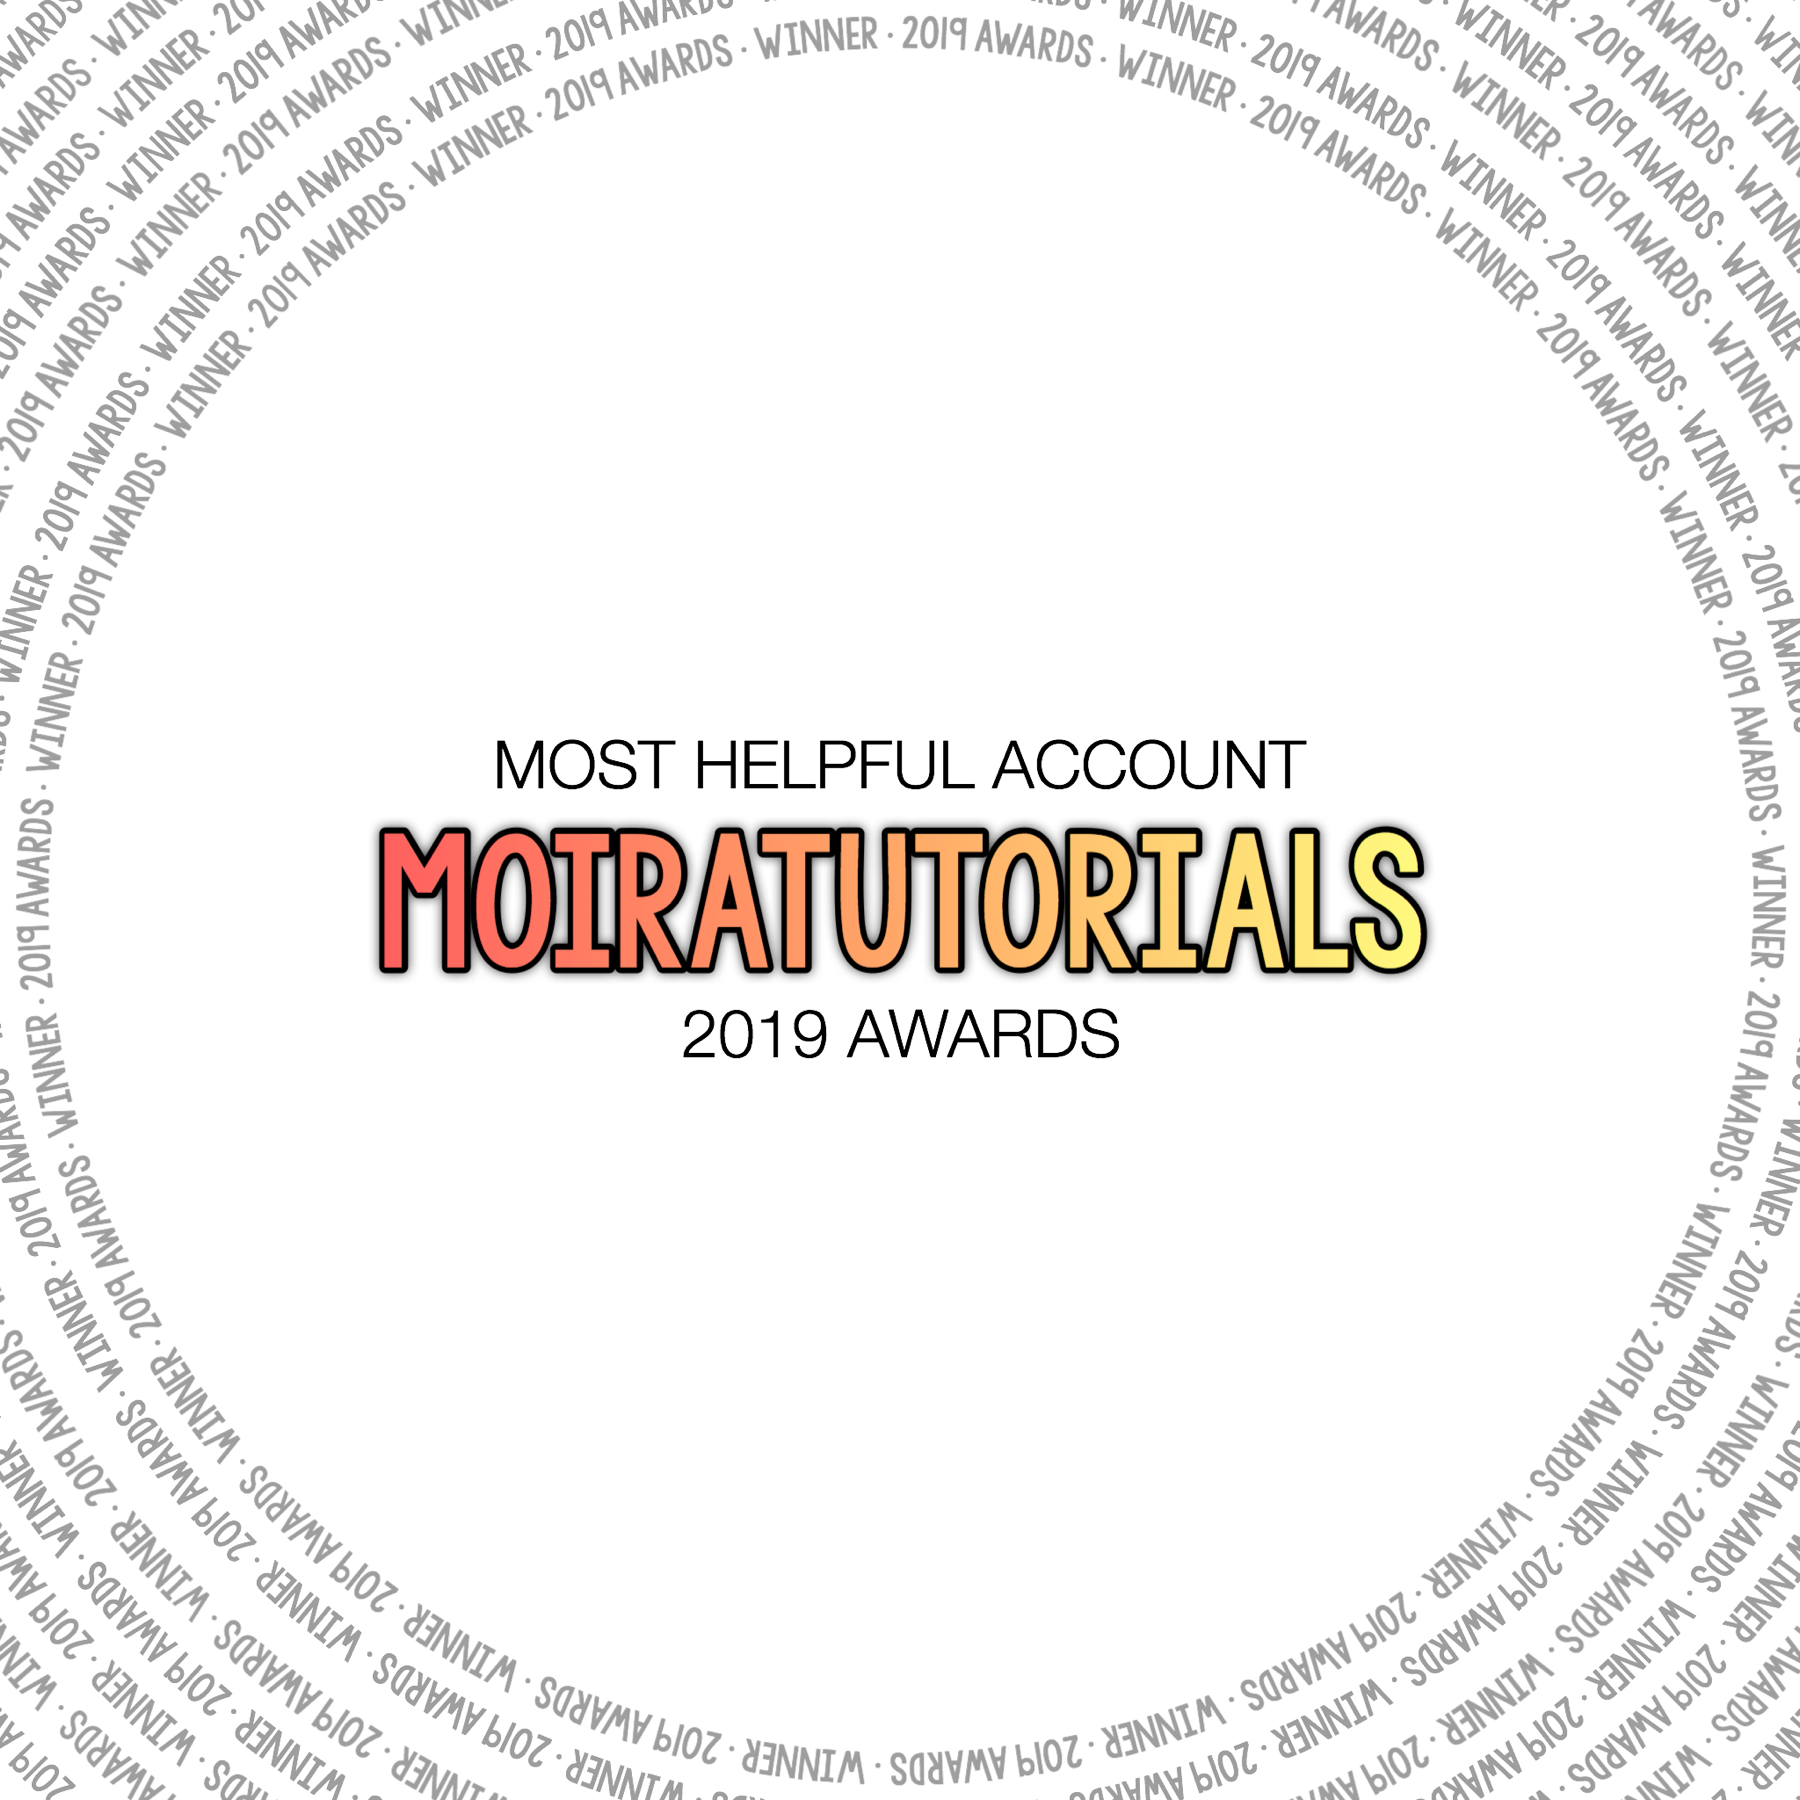 Congratulations @moiratutorials!

The vote count will be in the remixes